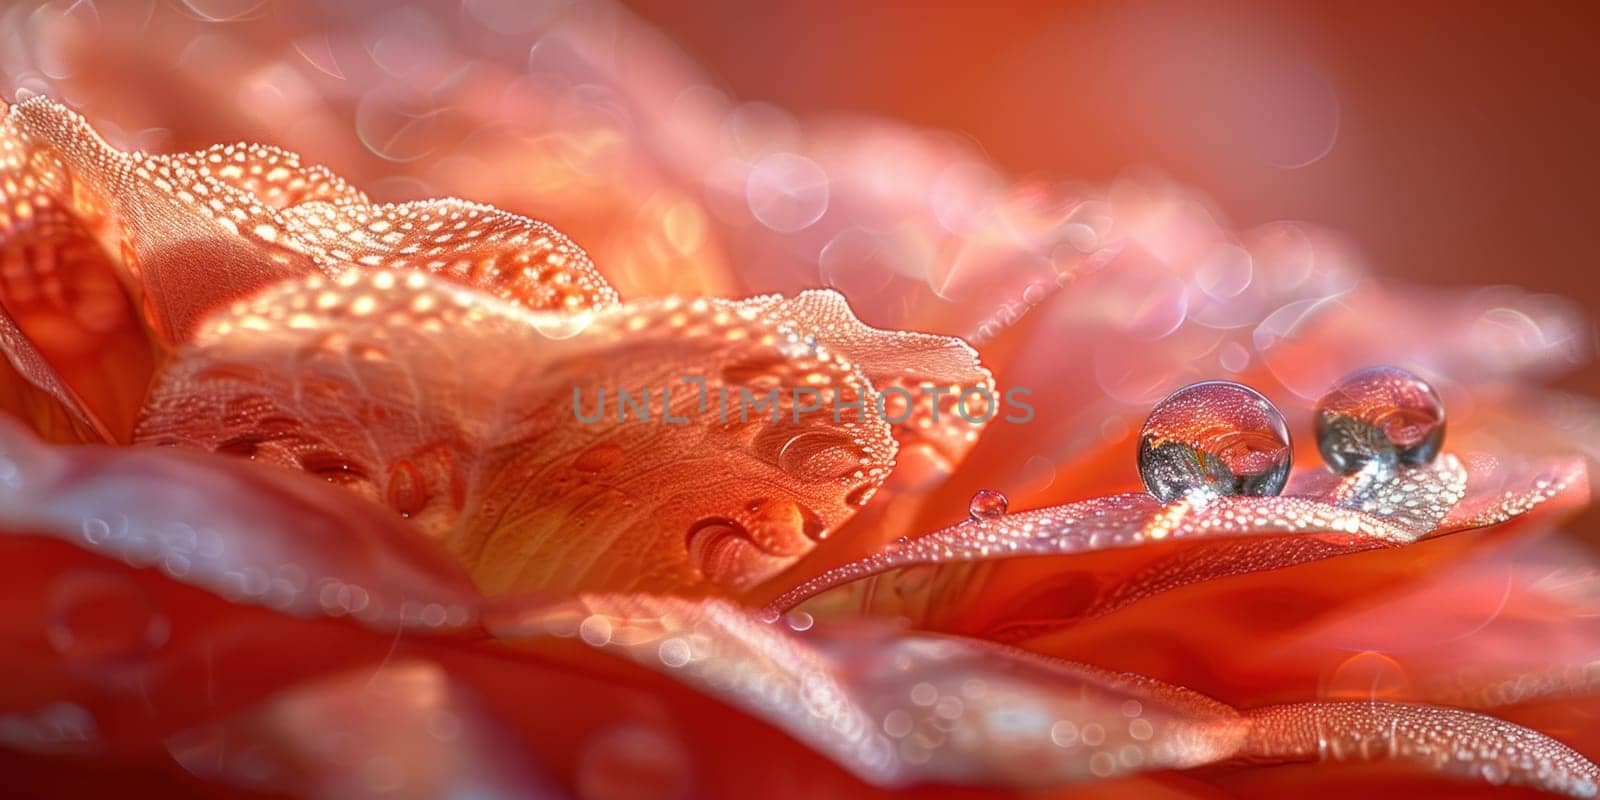 Dewy Rose Petal Close Up by but_photo